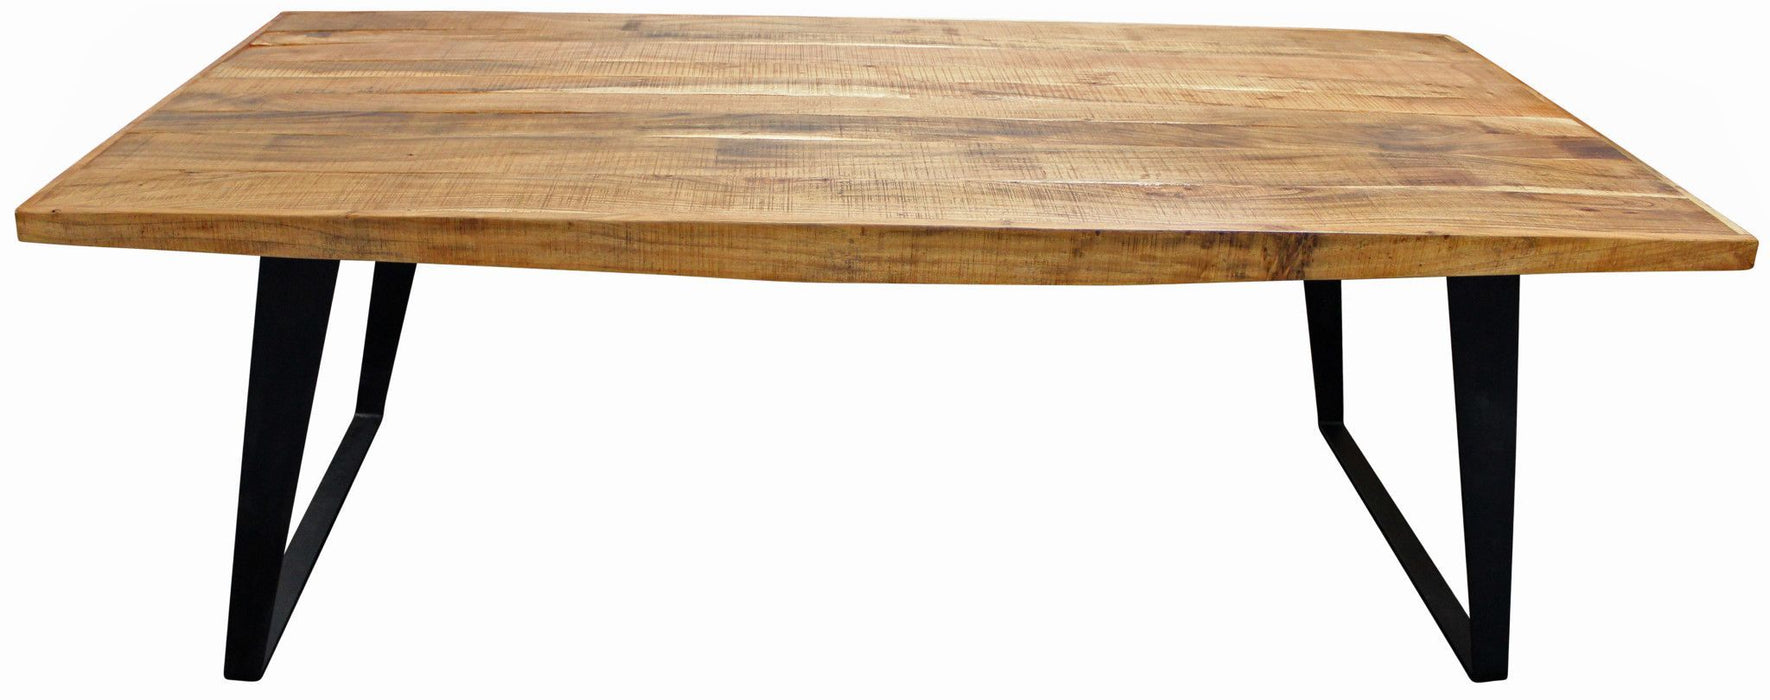 Solid Wood And Iron Rectangular Dining Table 84" - Natural And Black